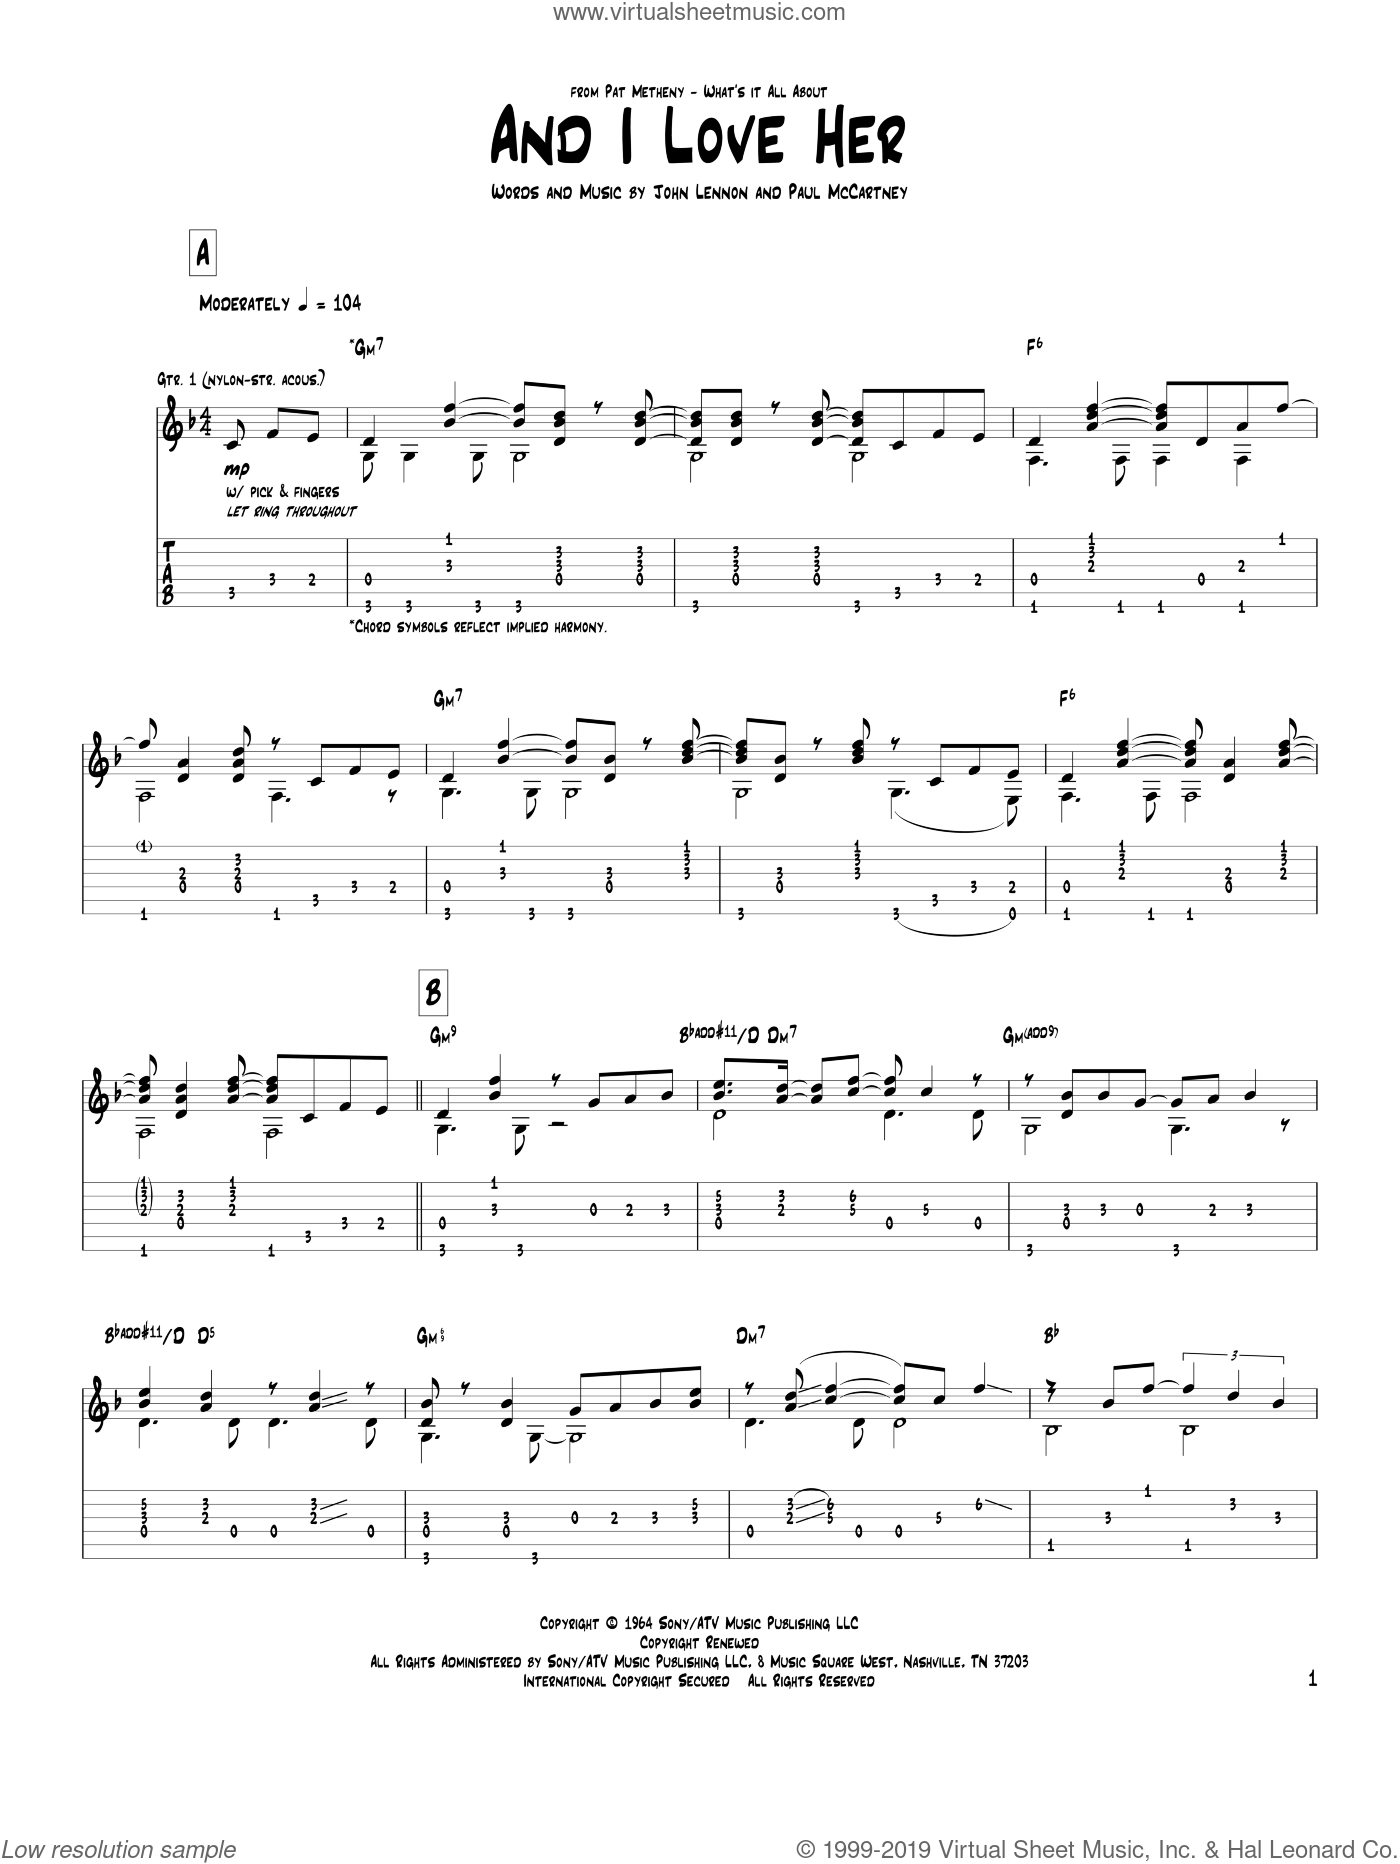 Pat metheny and i love her tab pdf file